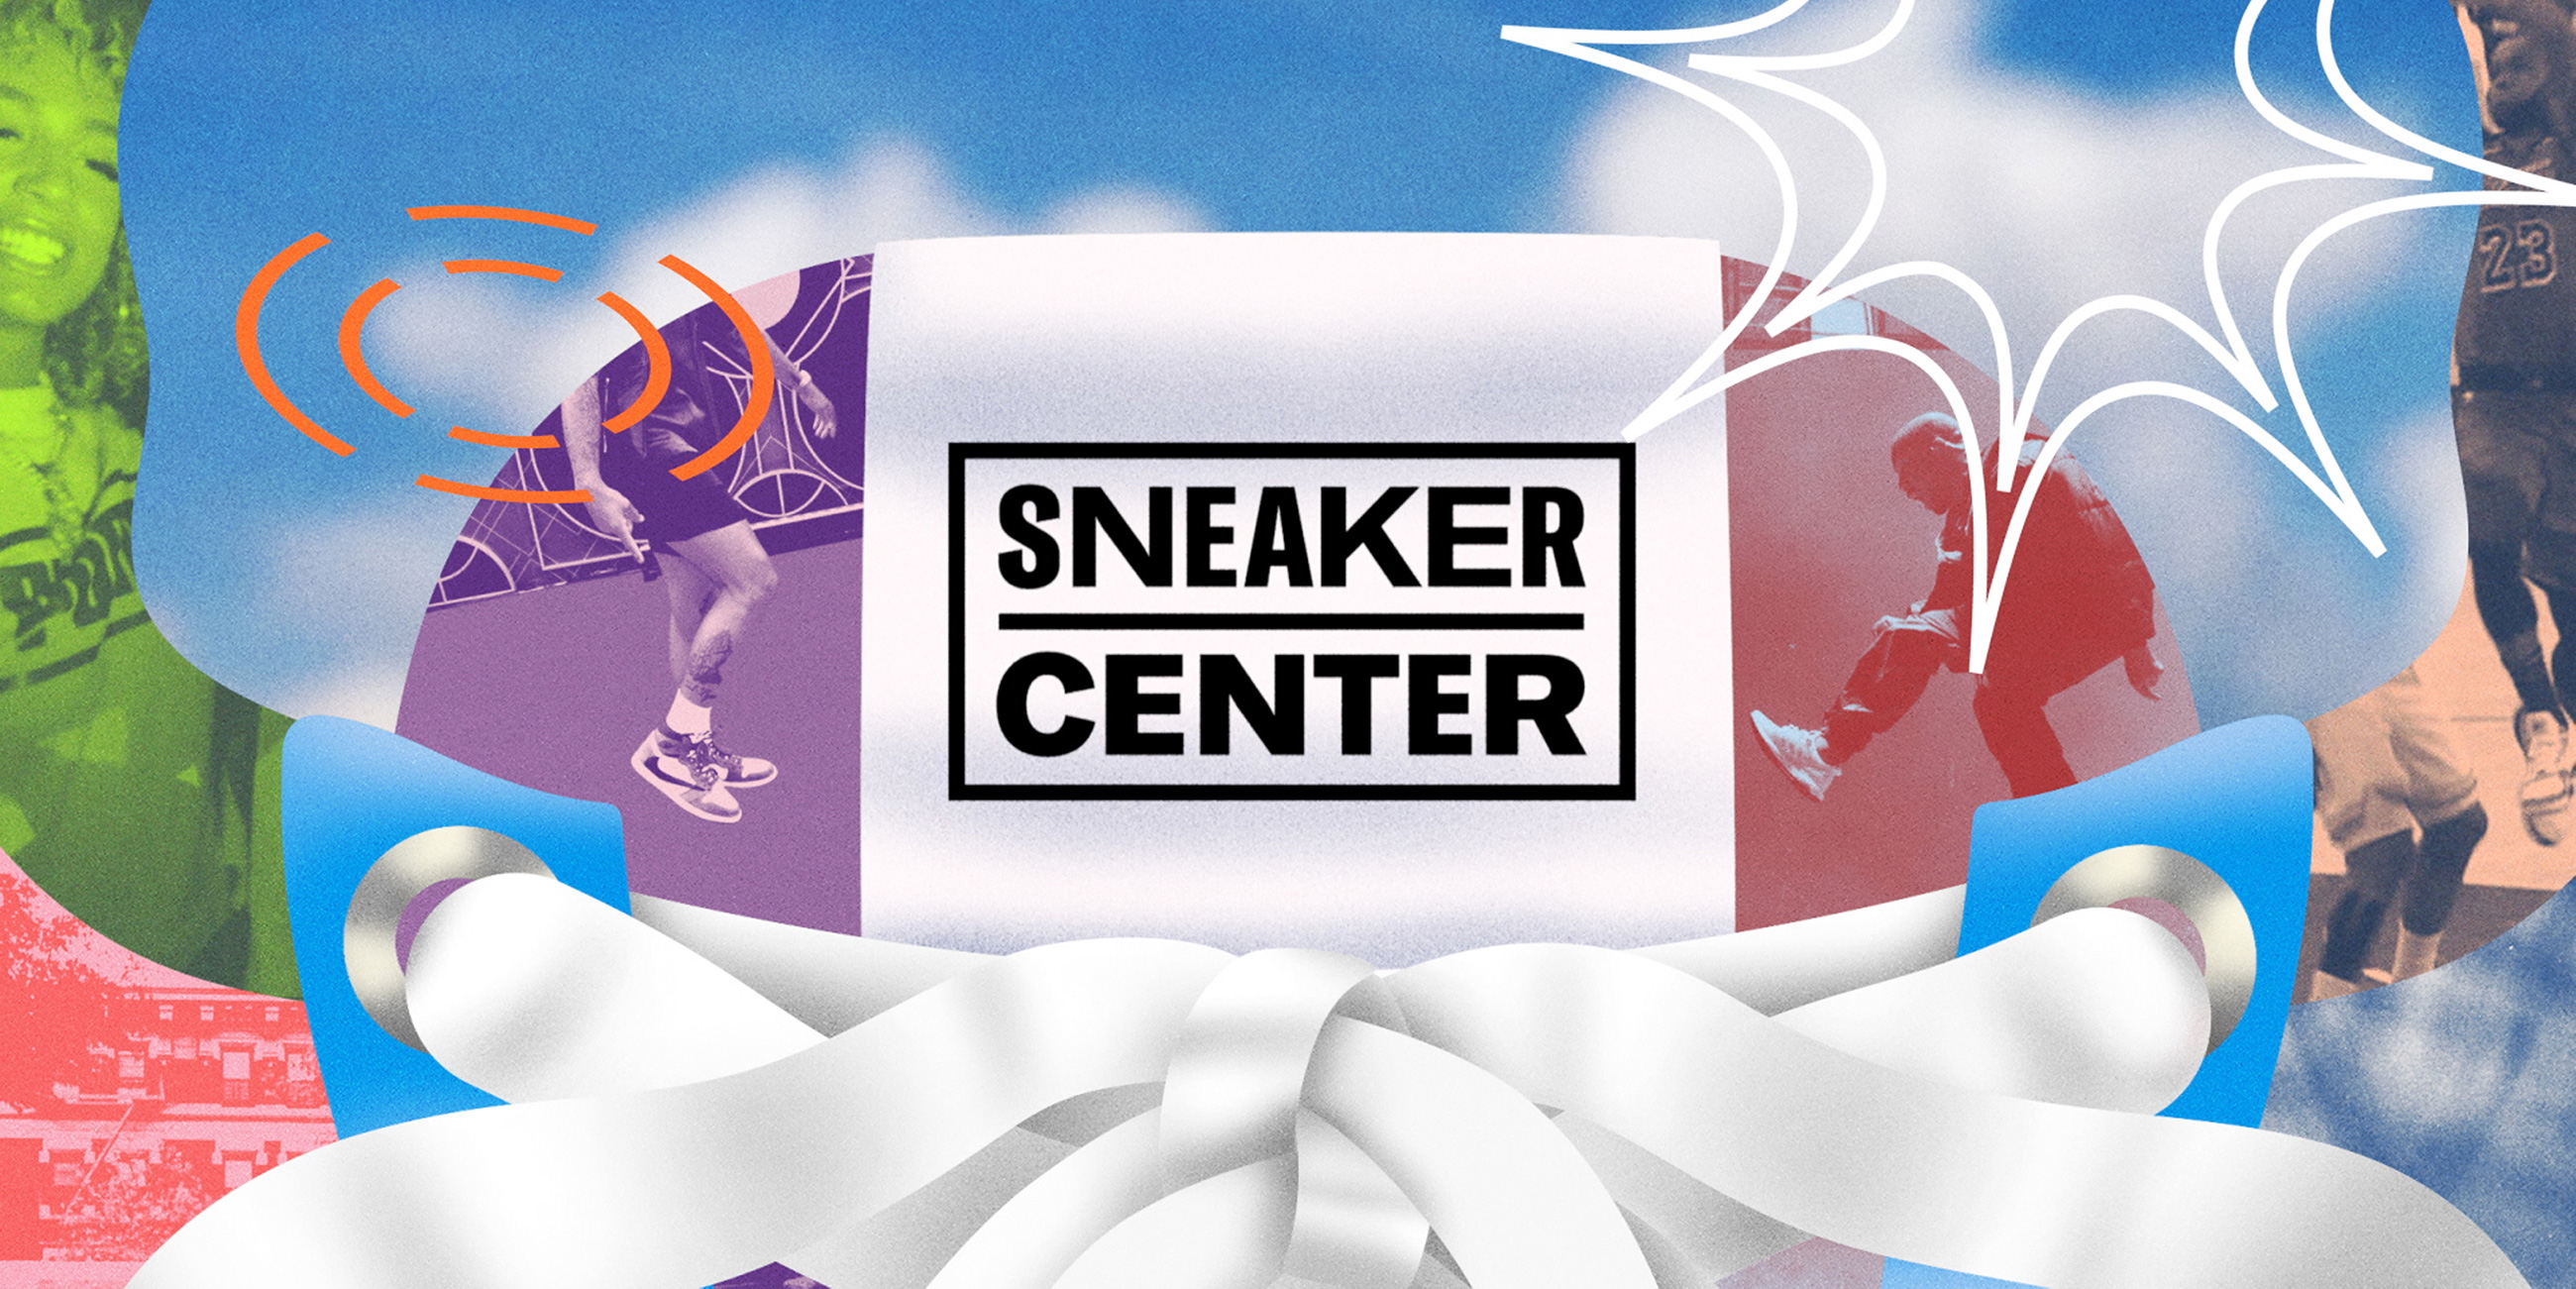 No Small “Feet”: How BLOCK & TACKLE Crafted the Graphics for ESPN’s SneakerCenter